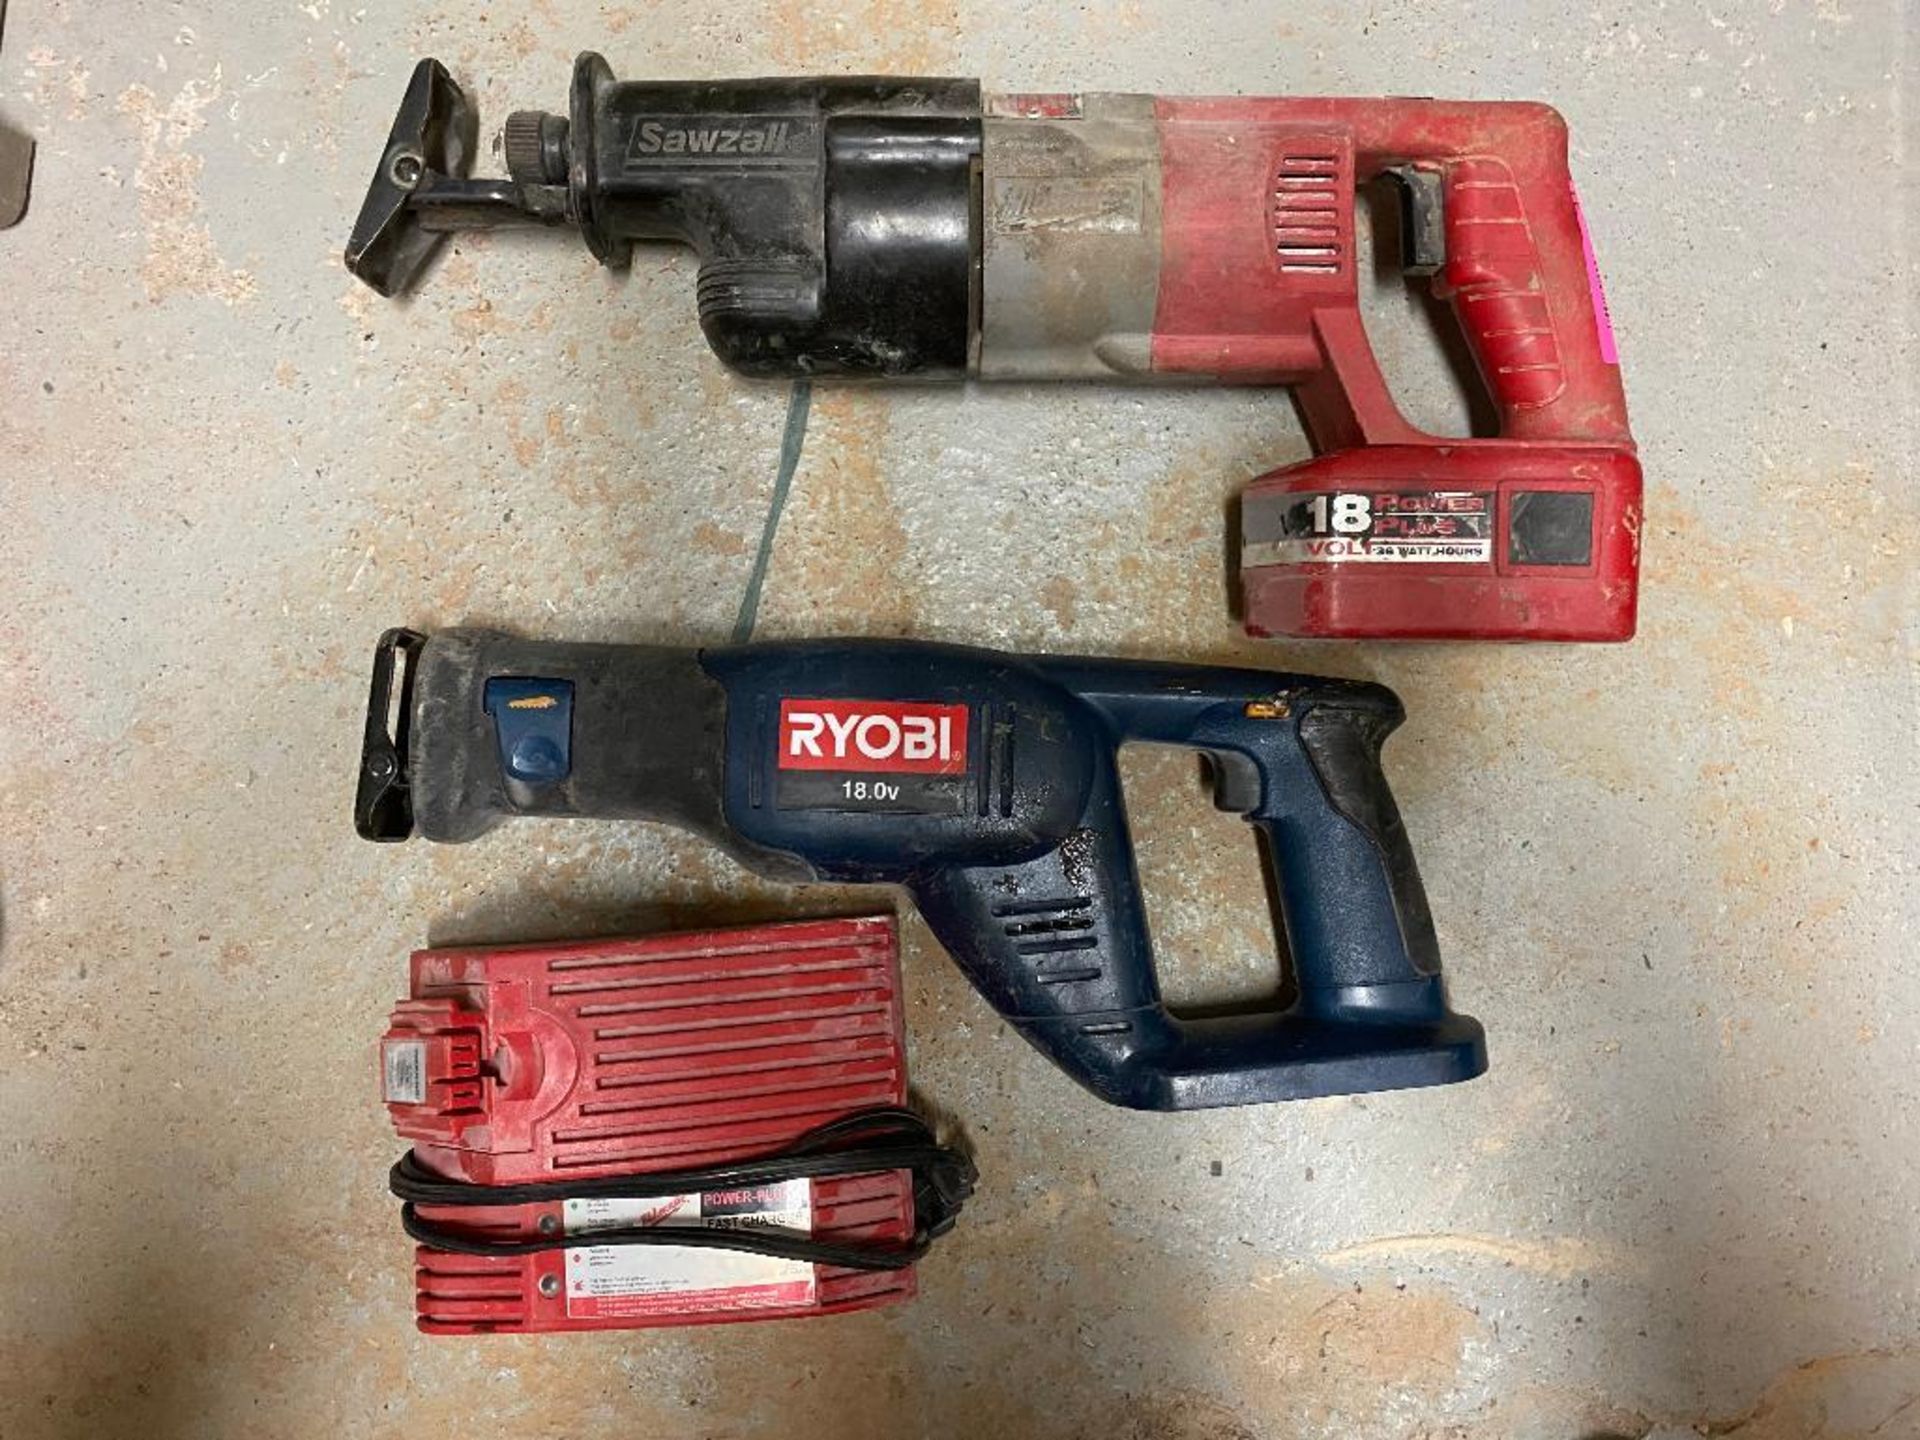 DESCRIPTION VARIOUS RECIPROCATING SAWS (RYOBI HAS NO BATTERY OR CHARGER) LOCATION BASEMENT: TOOL ROO - Image 2 of 4